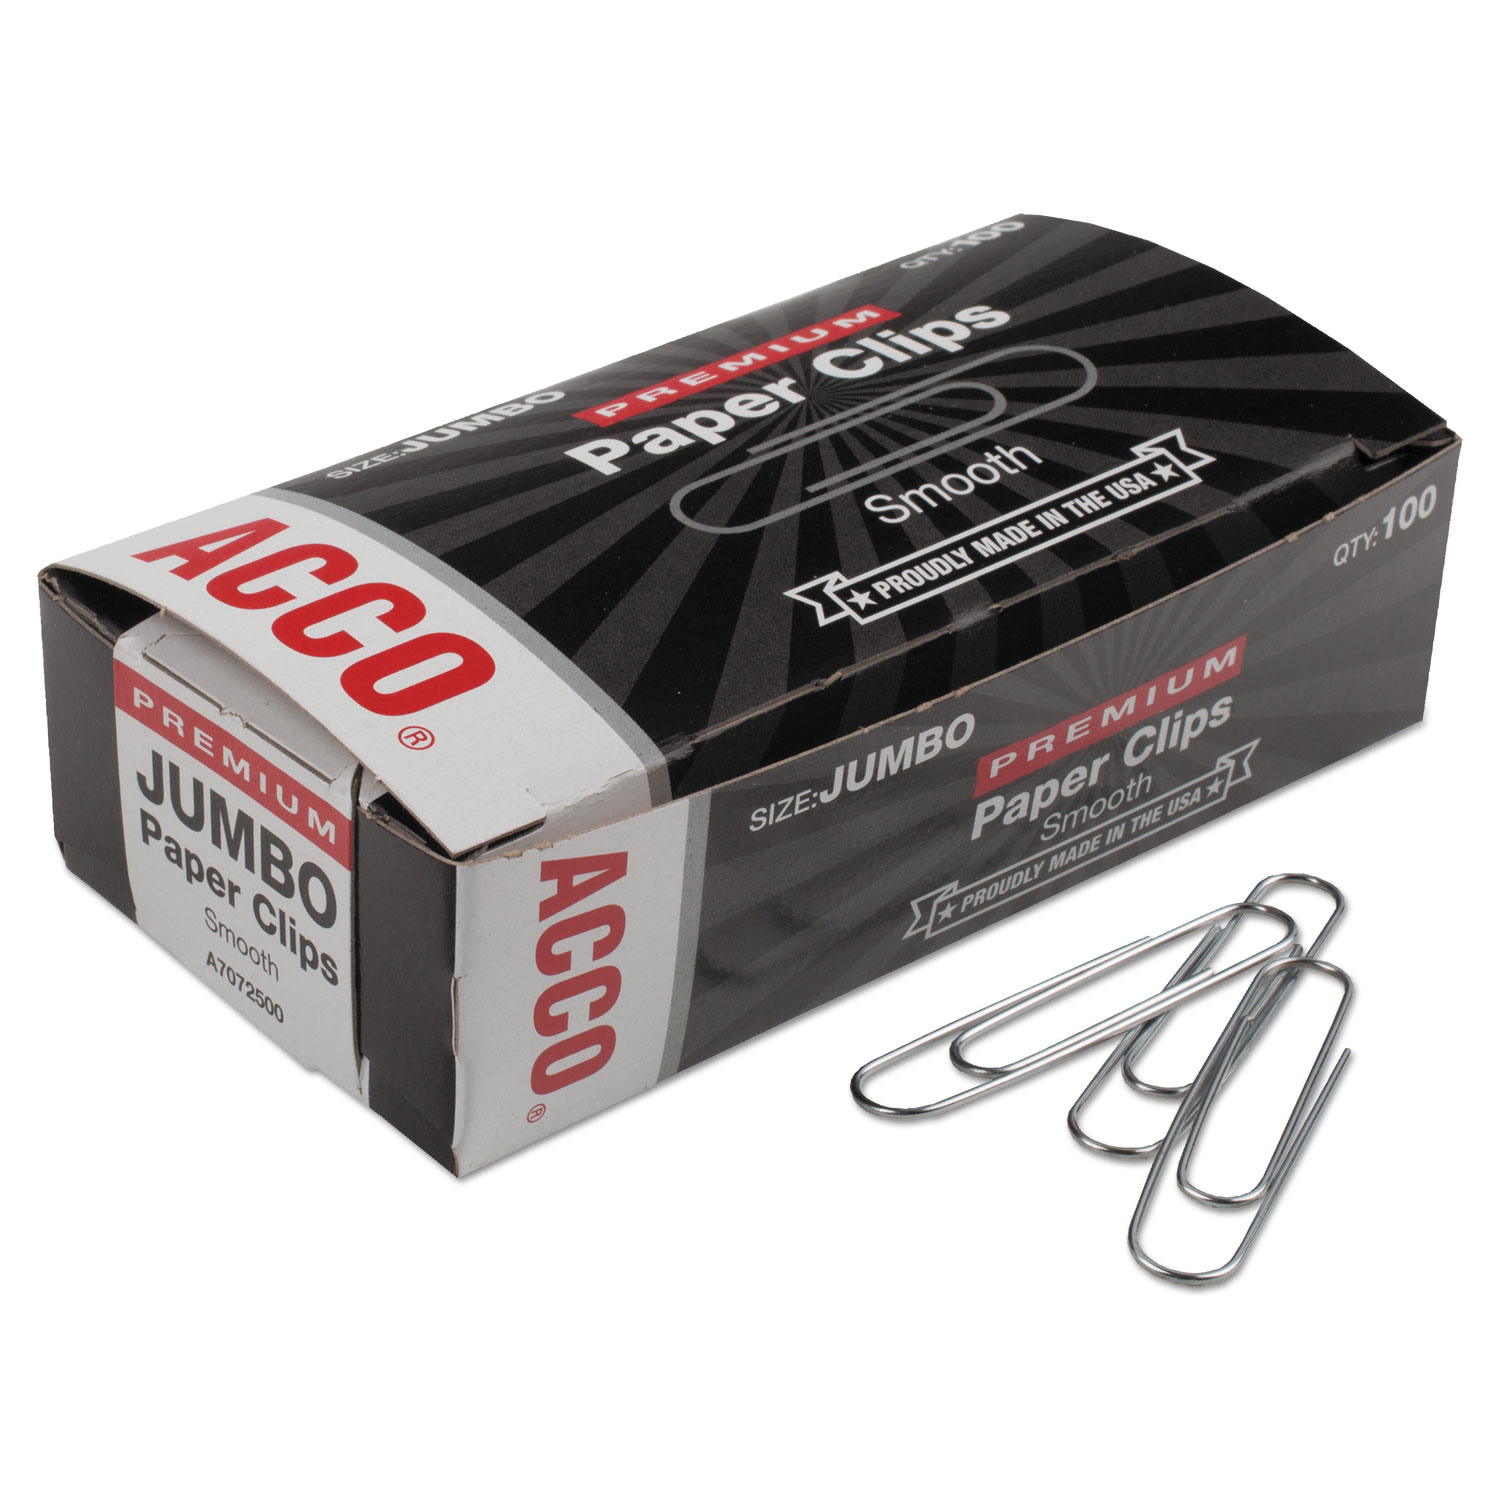  ACCO A7072500G Paper Clips, Jumbo, Silver, 1,000/Pack (ACC72500) 